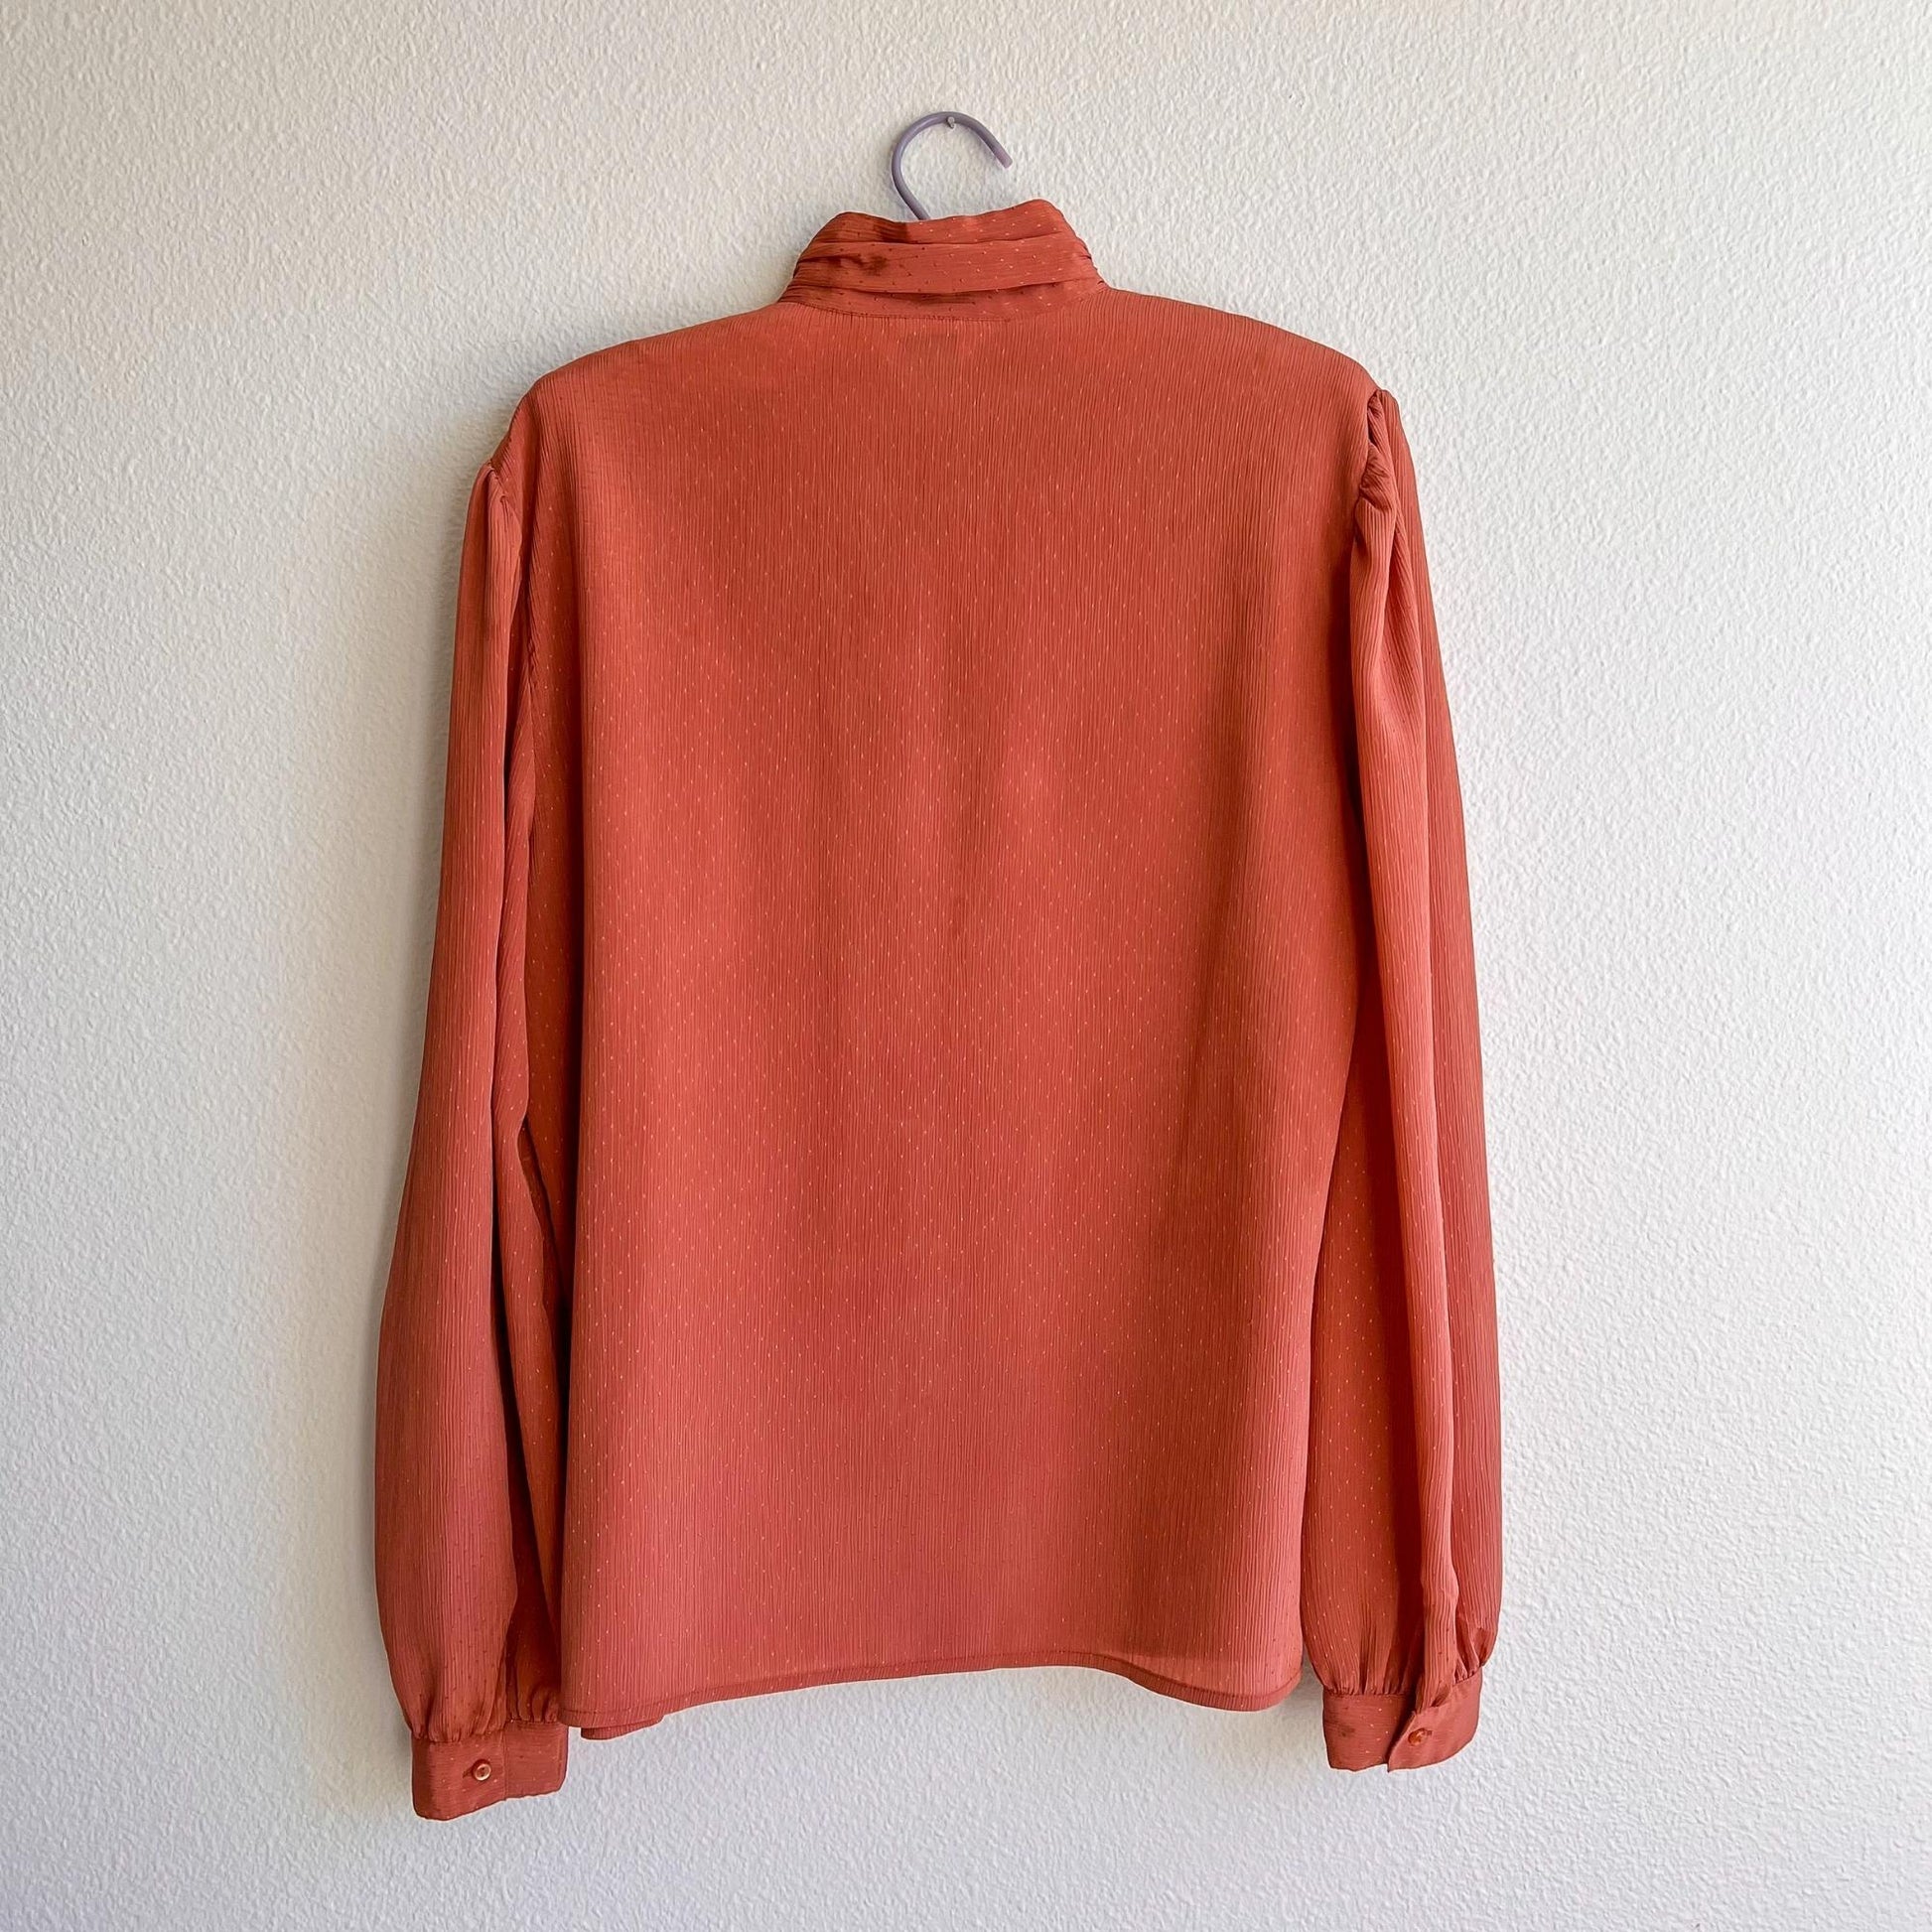 Red Funnel Neck Blouse, Red Blouse